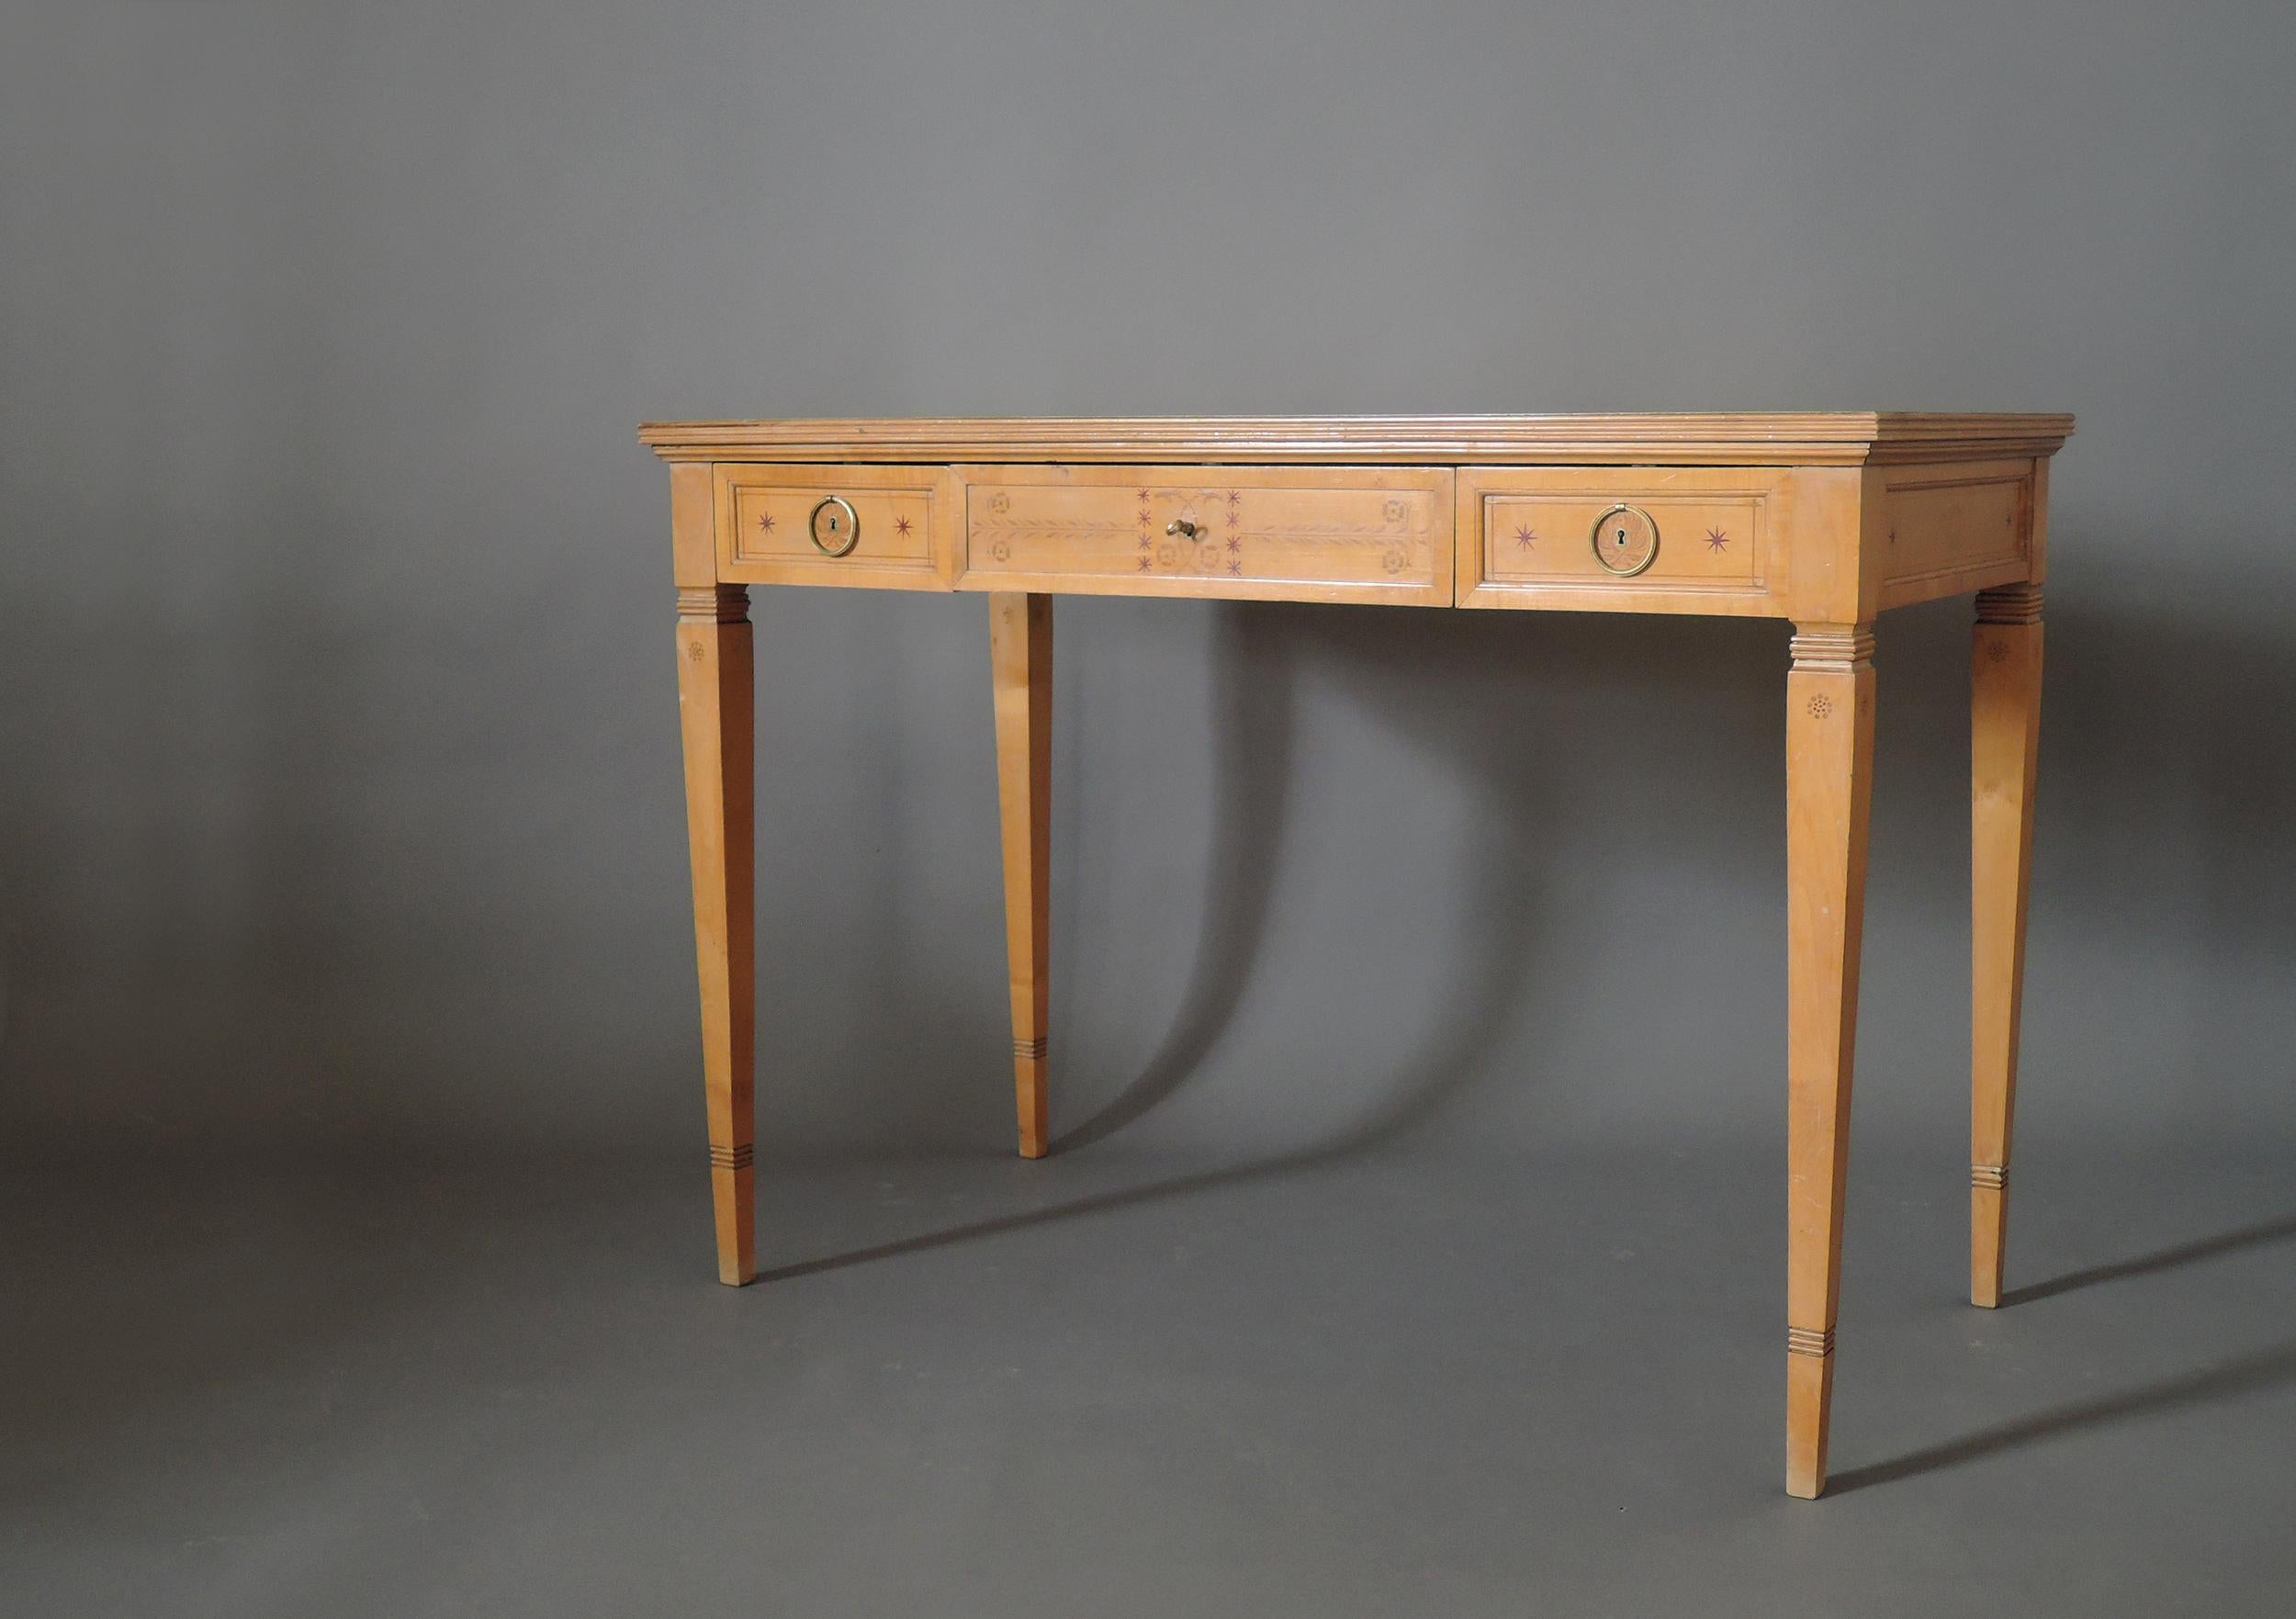 Early 20th Century Fine French Art Deco Sycamore Desk by R. Damon & Bertaux